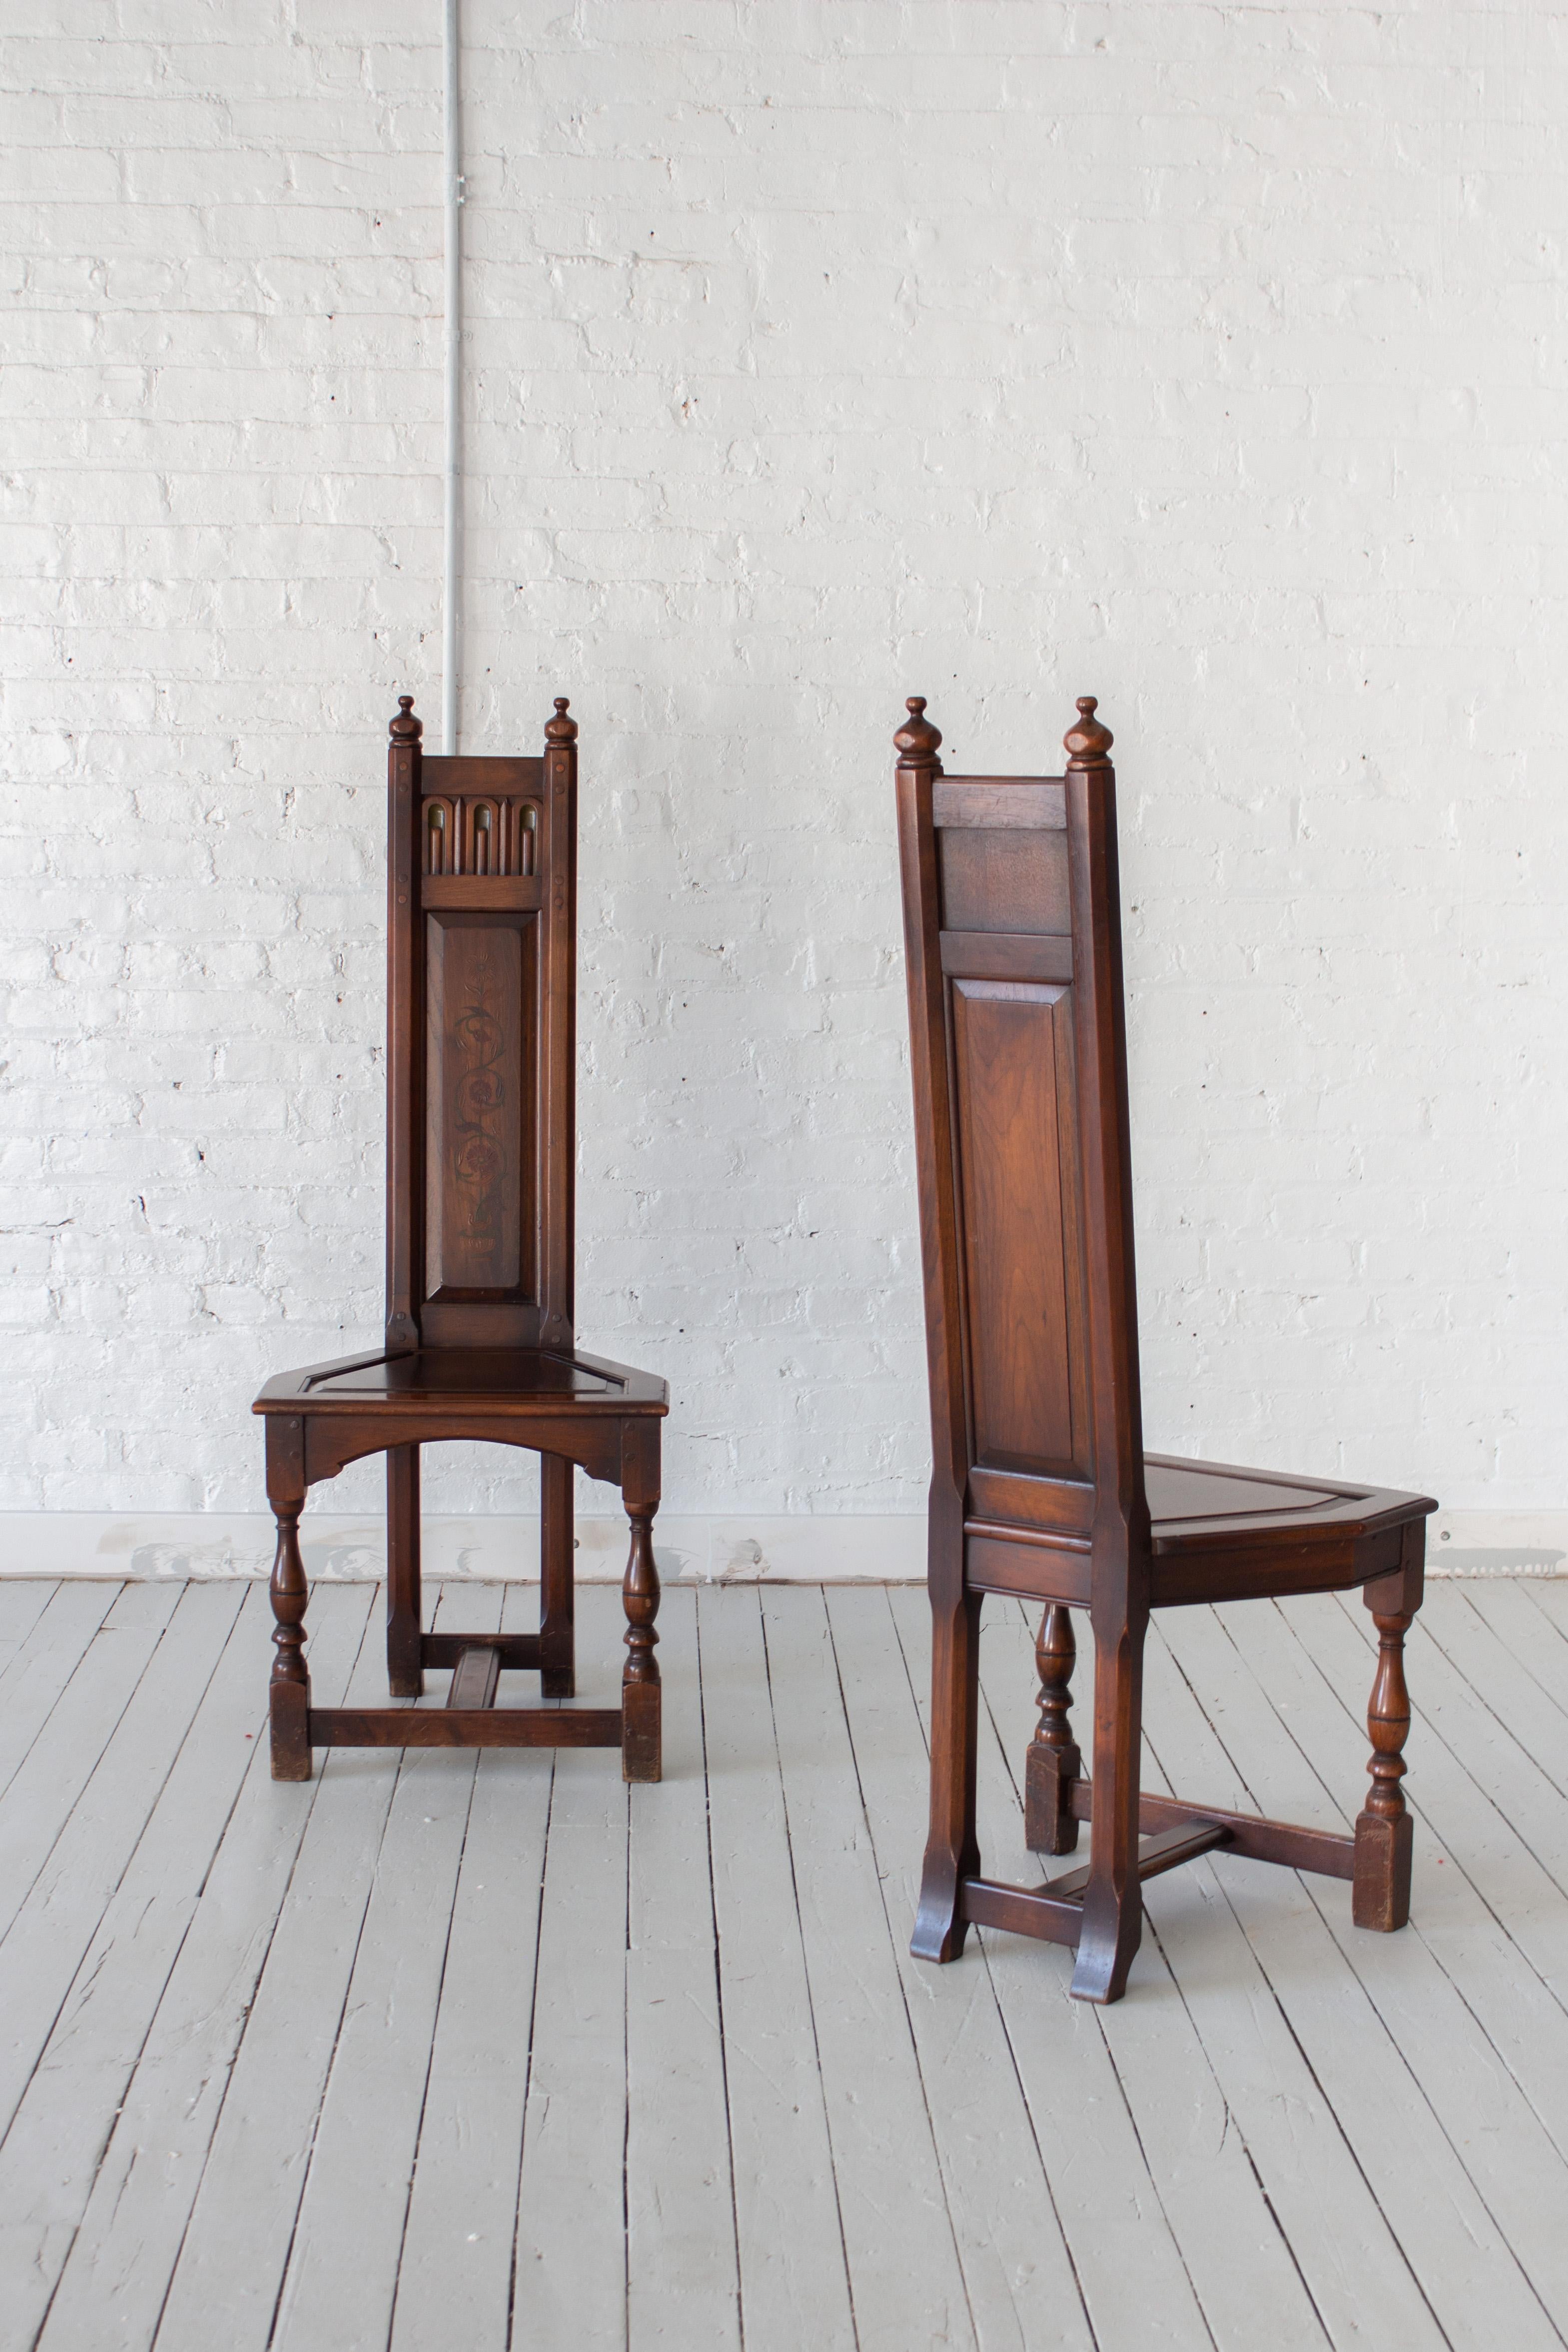 Pair of Gothic Revival Decorated Wooden Chairs by Kittinger For Sale 1